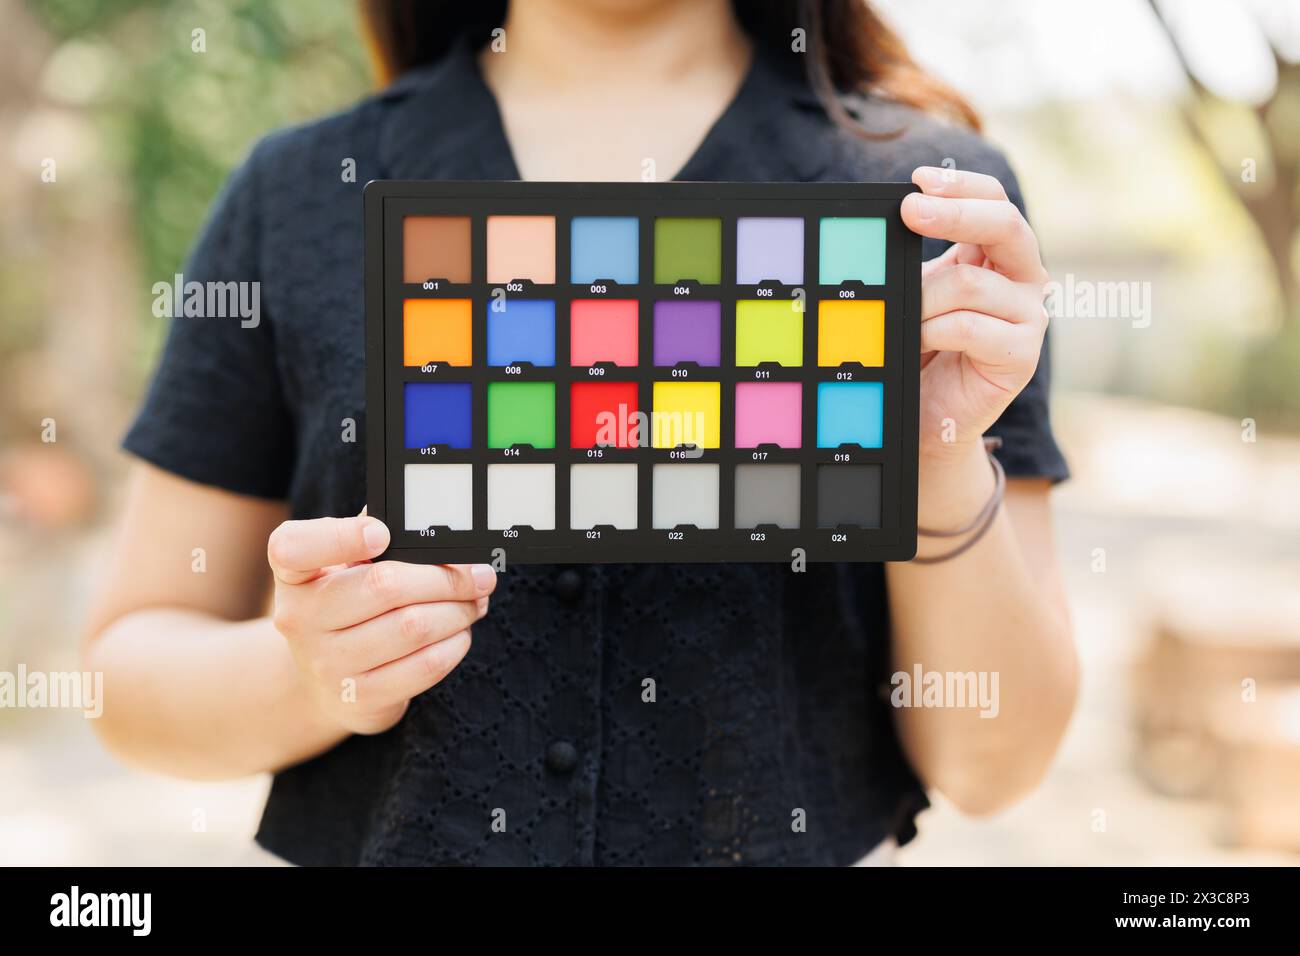 Photography model holding color checker board or colors chart for calibrate accurate colors photos or videos Stock Photo